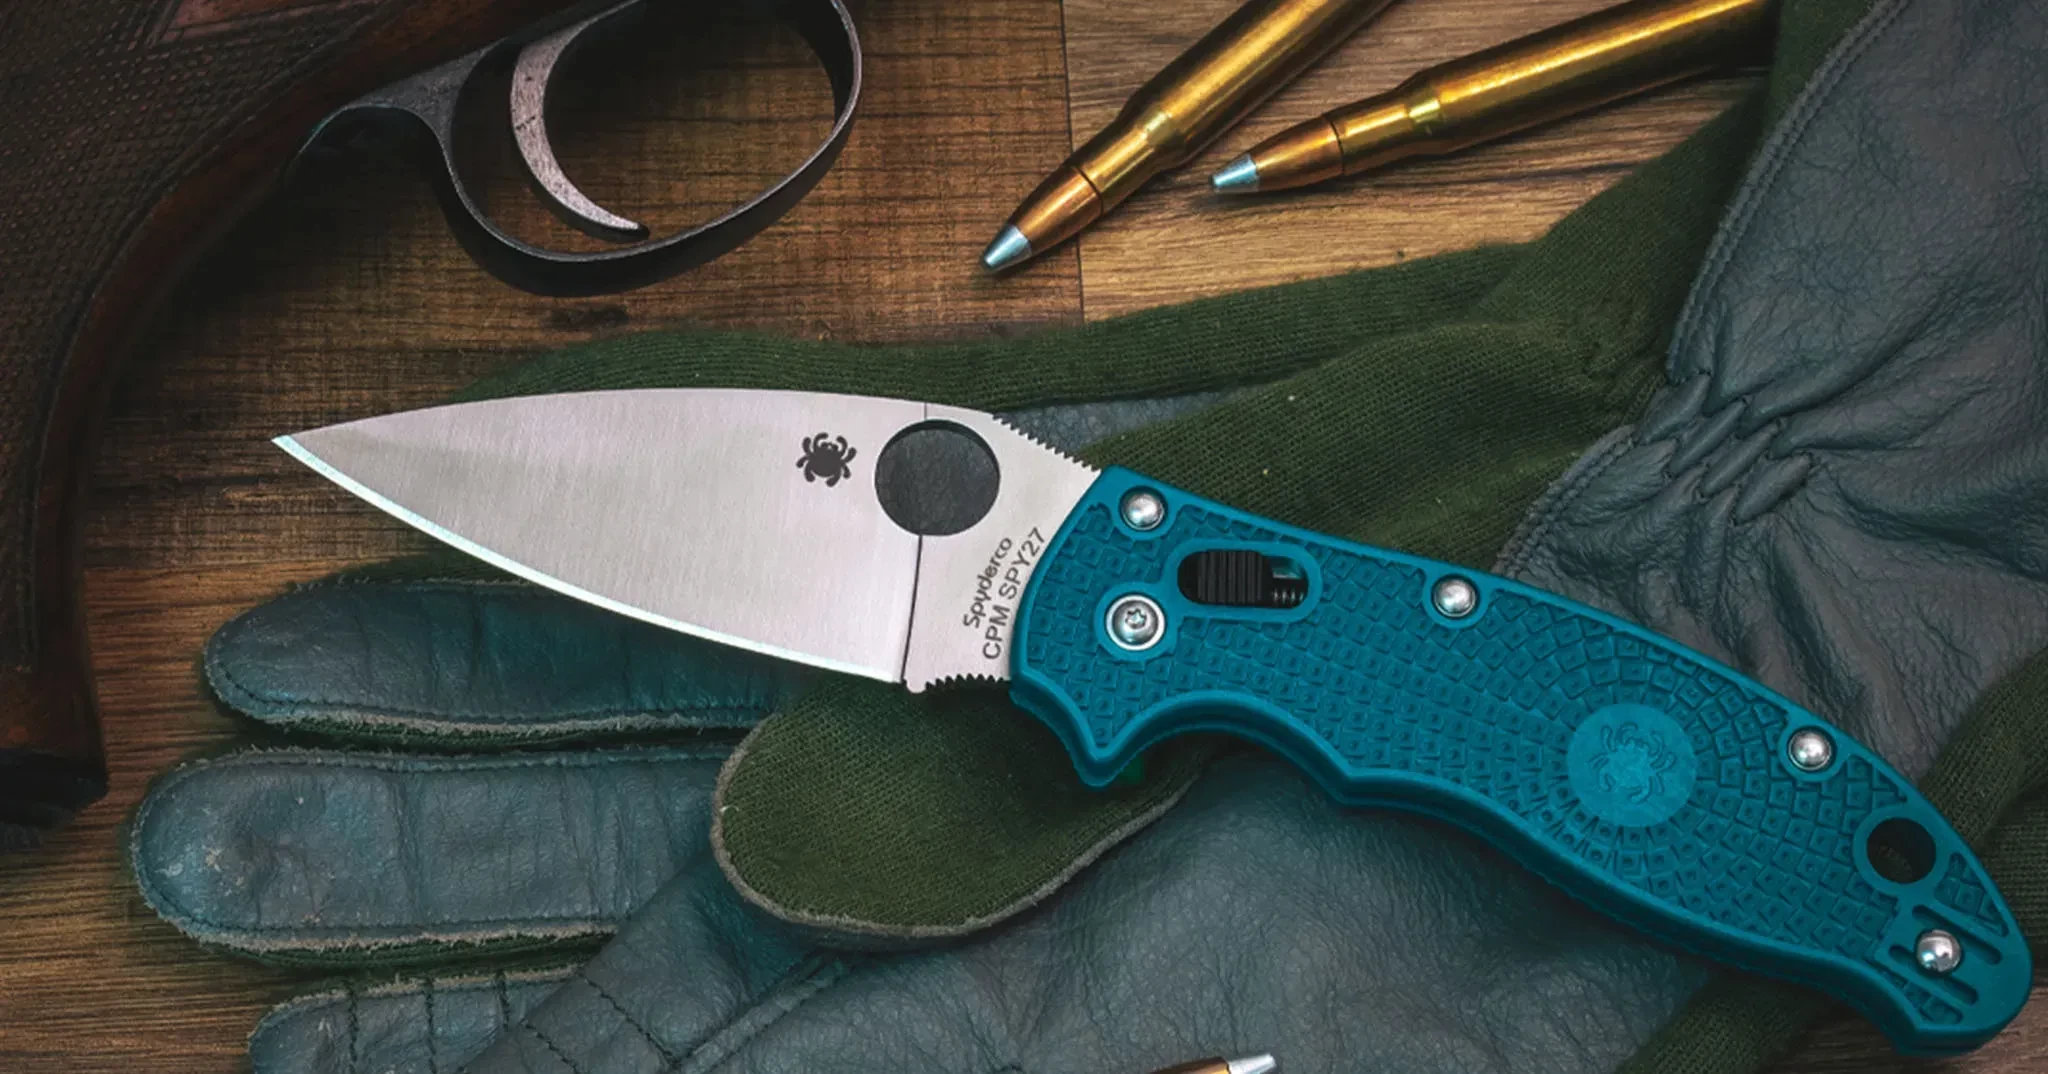 A climbing knife fitted with a blue stainless steel handle